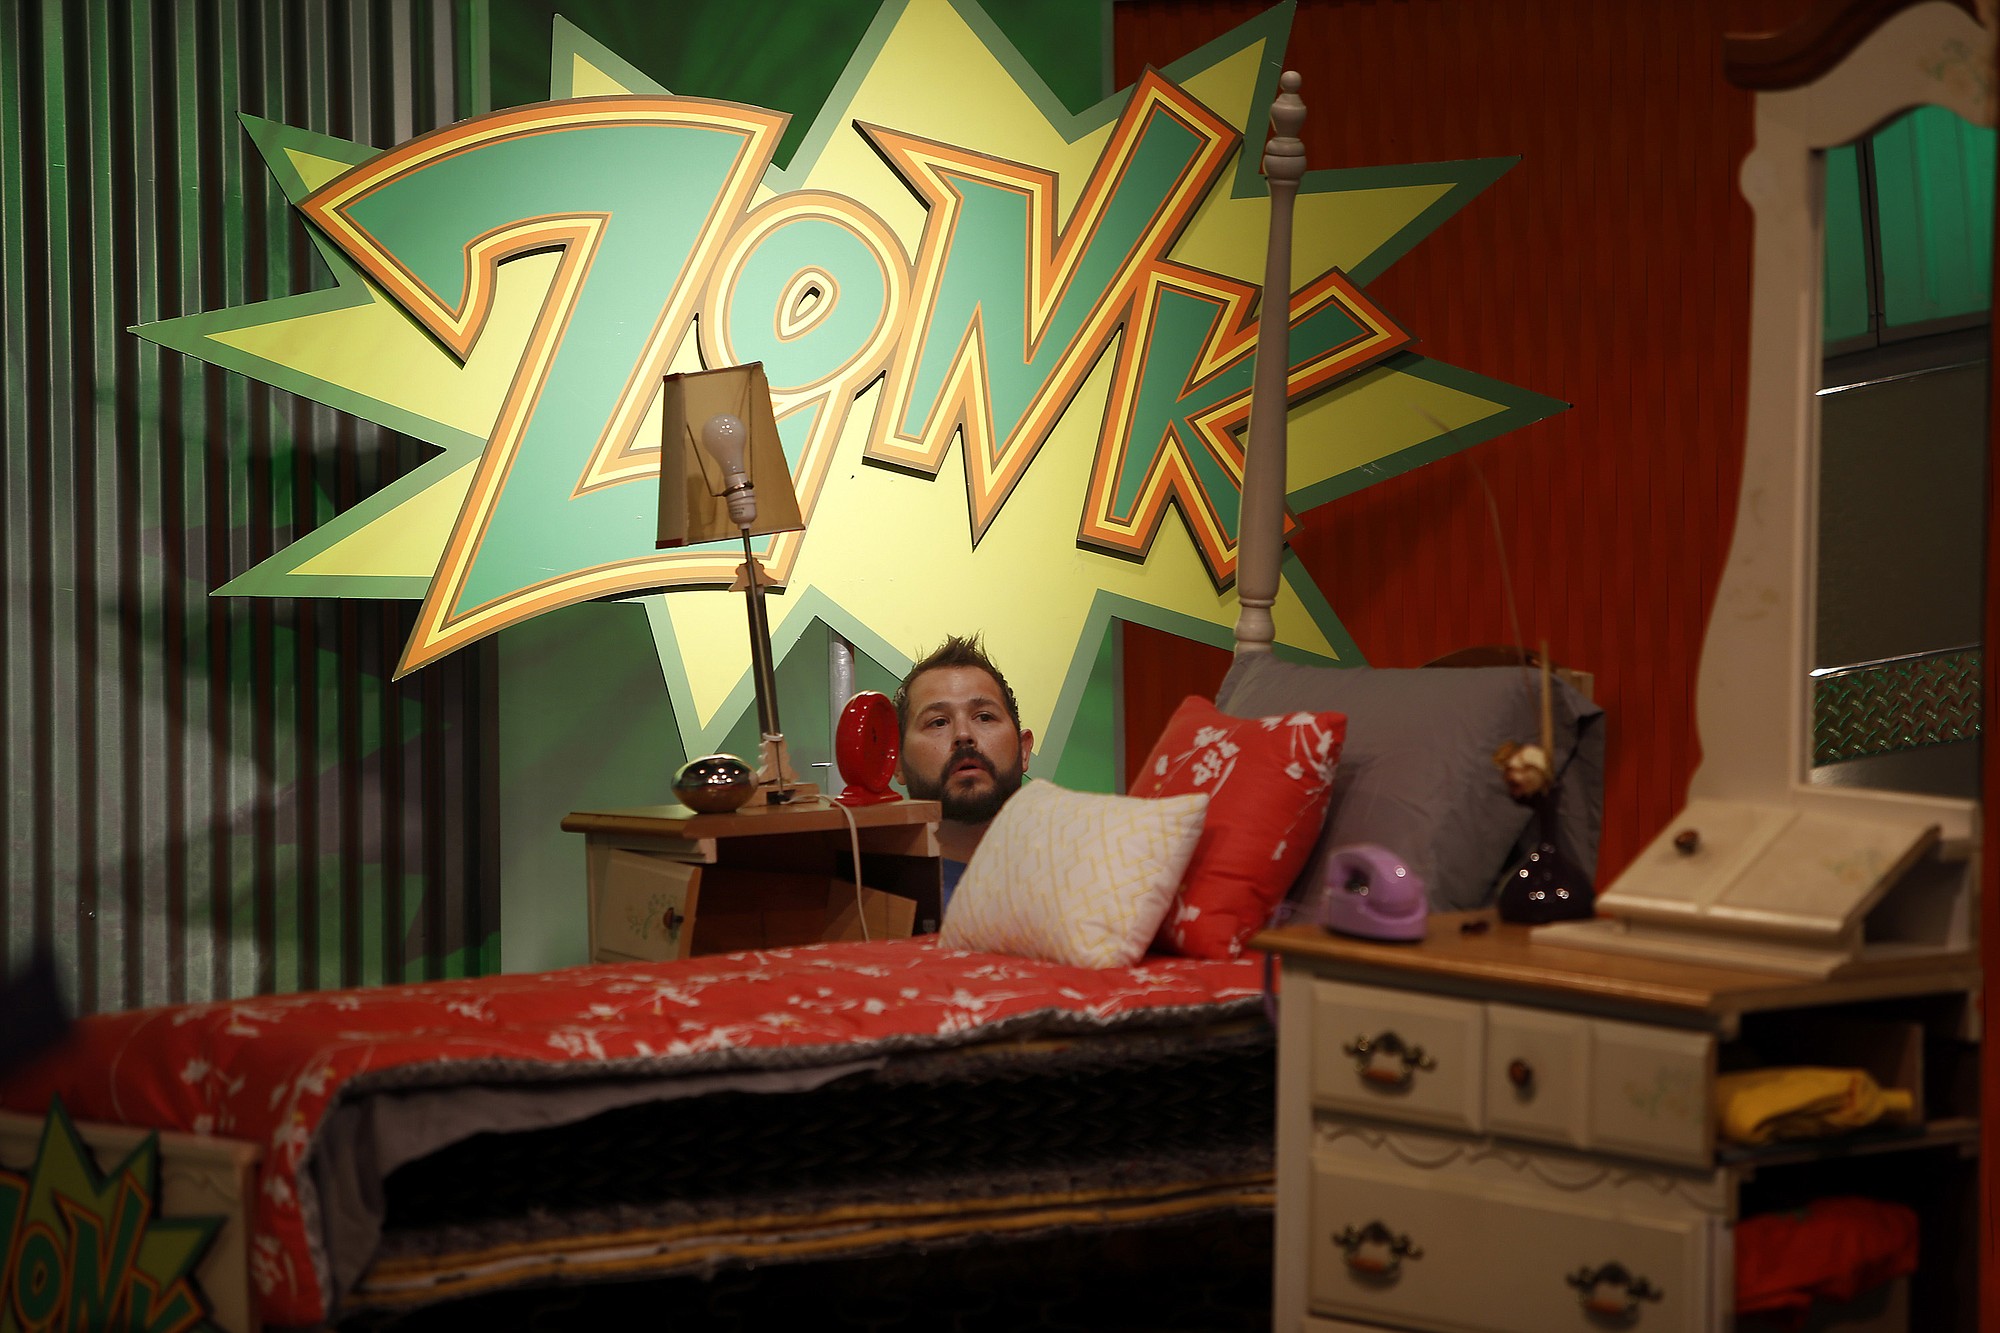 &quot;Zonk&quot; producer-lead man Jersey Feimster pokes his head up from behind a Zonk prize: A half a bedroom set, during rehearsal for &quot;Let's Make a Deal.&quot; Zonks are undesirable items.